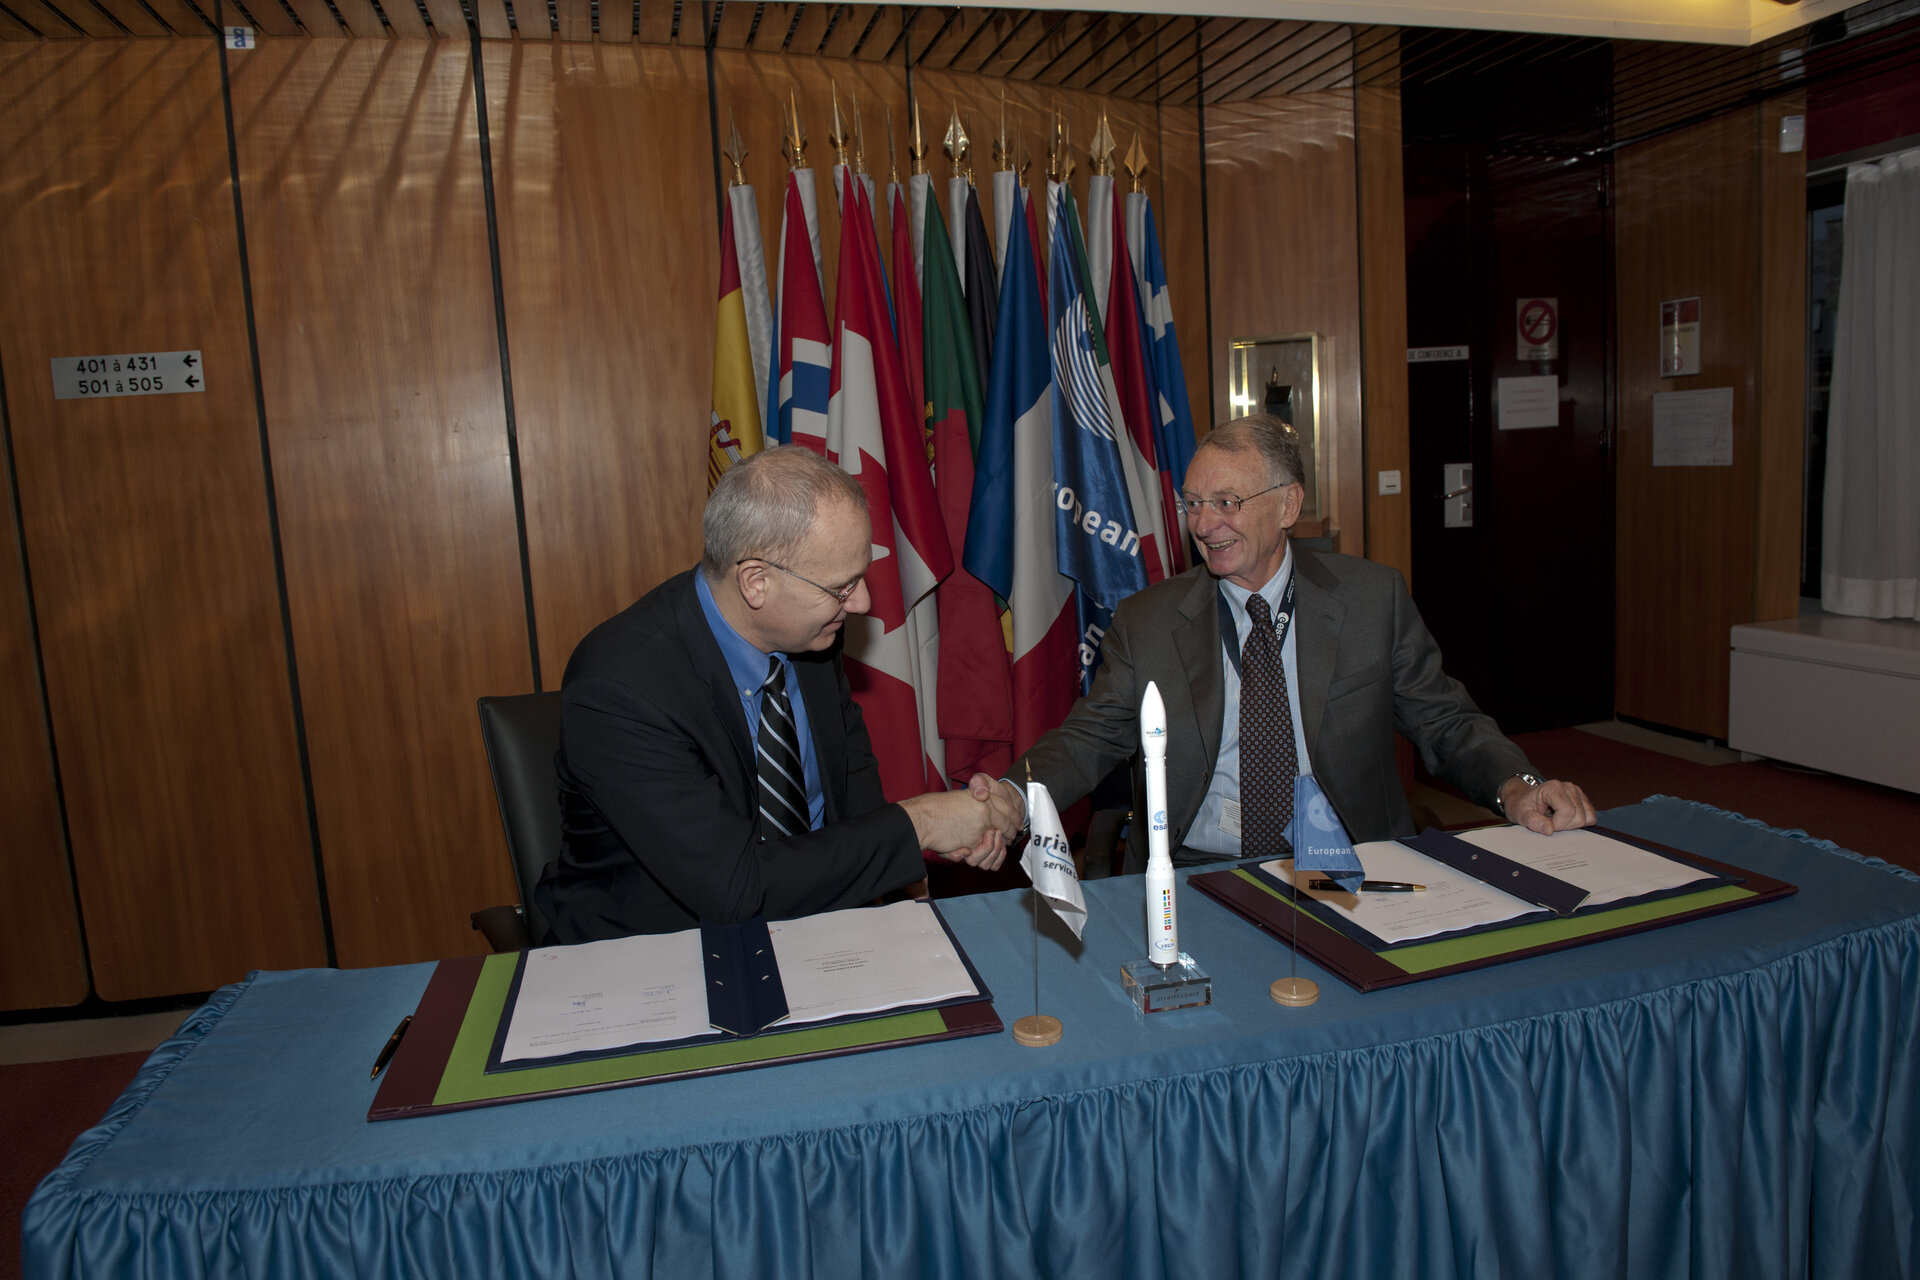 Jean-Yves Le Gall, CEO of Arianespace (left) and Antonio Fabrizi, ESA Director of Launchers (right)